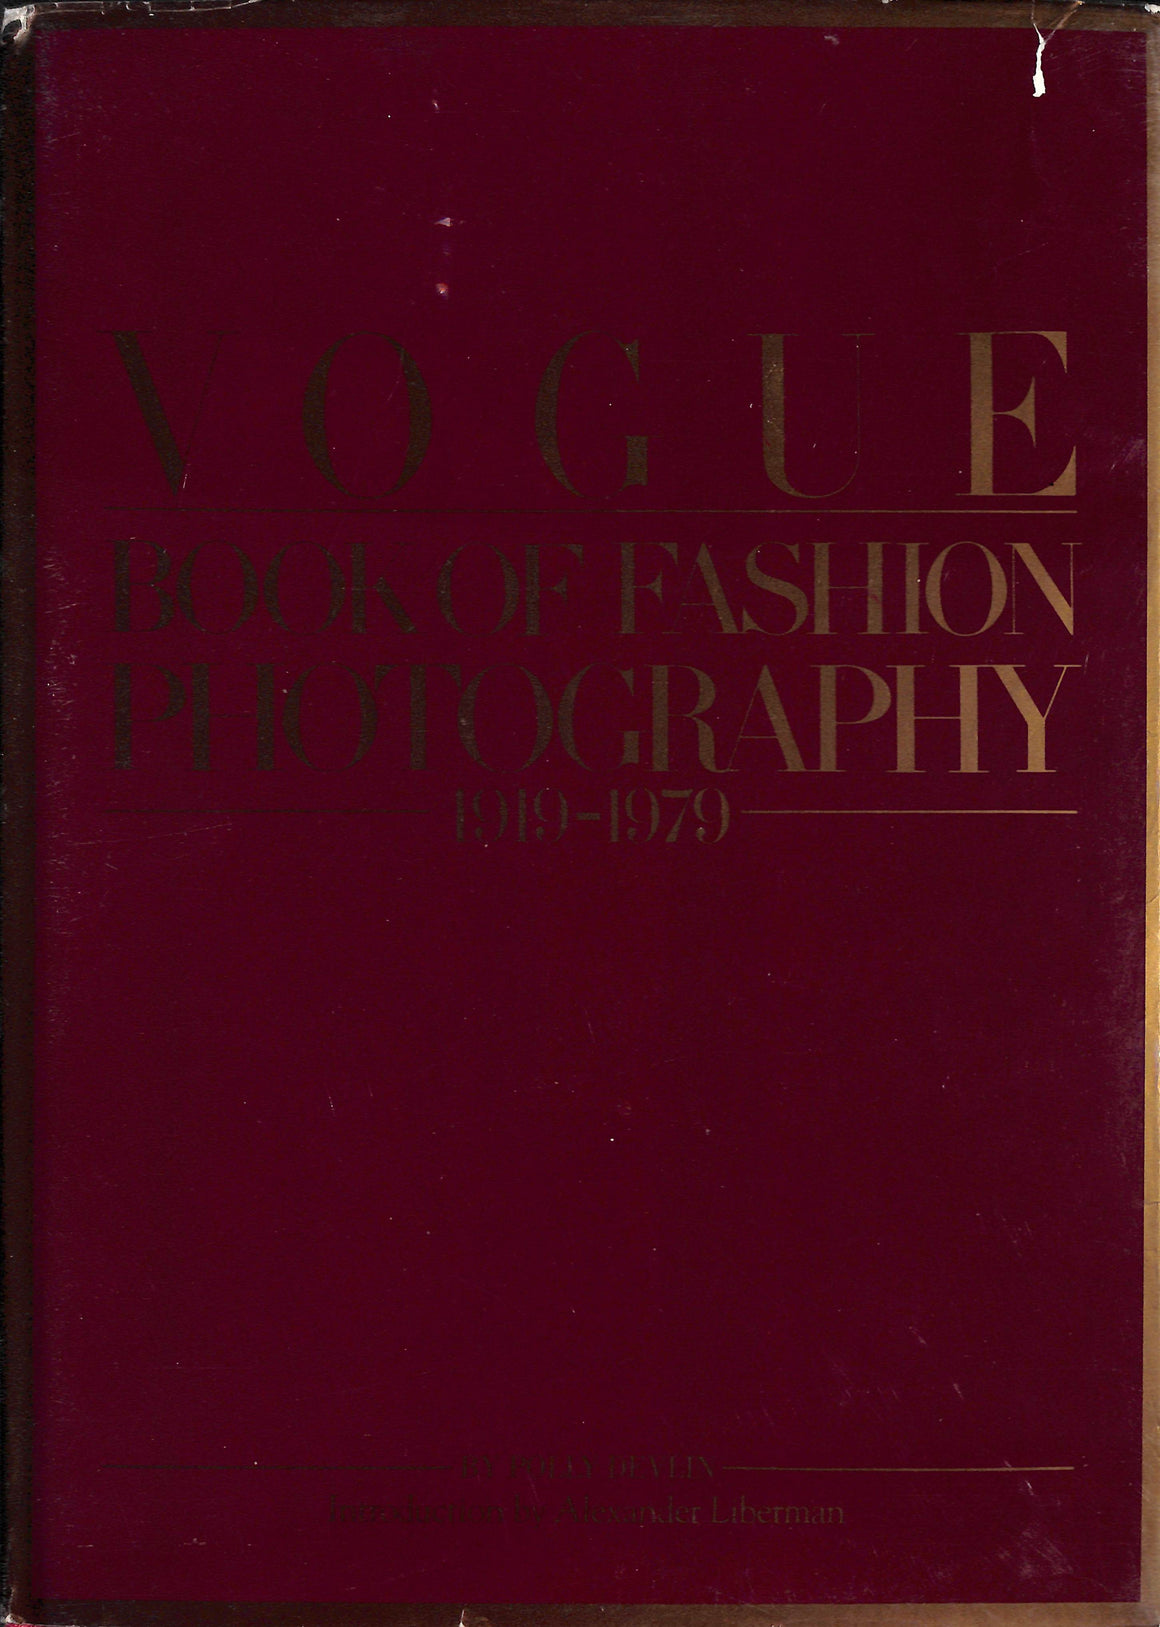 "Vogue Book of Fashion Photography 1919-1979" DEVLIN, Polly